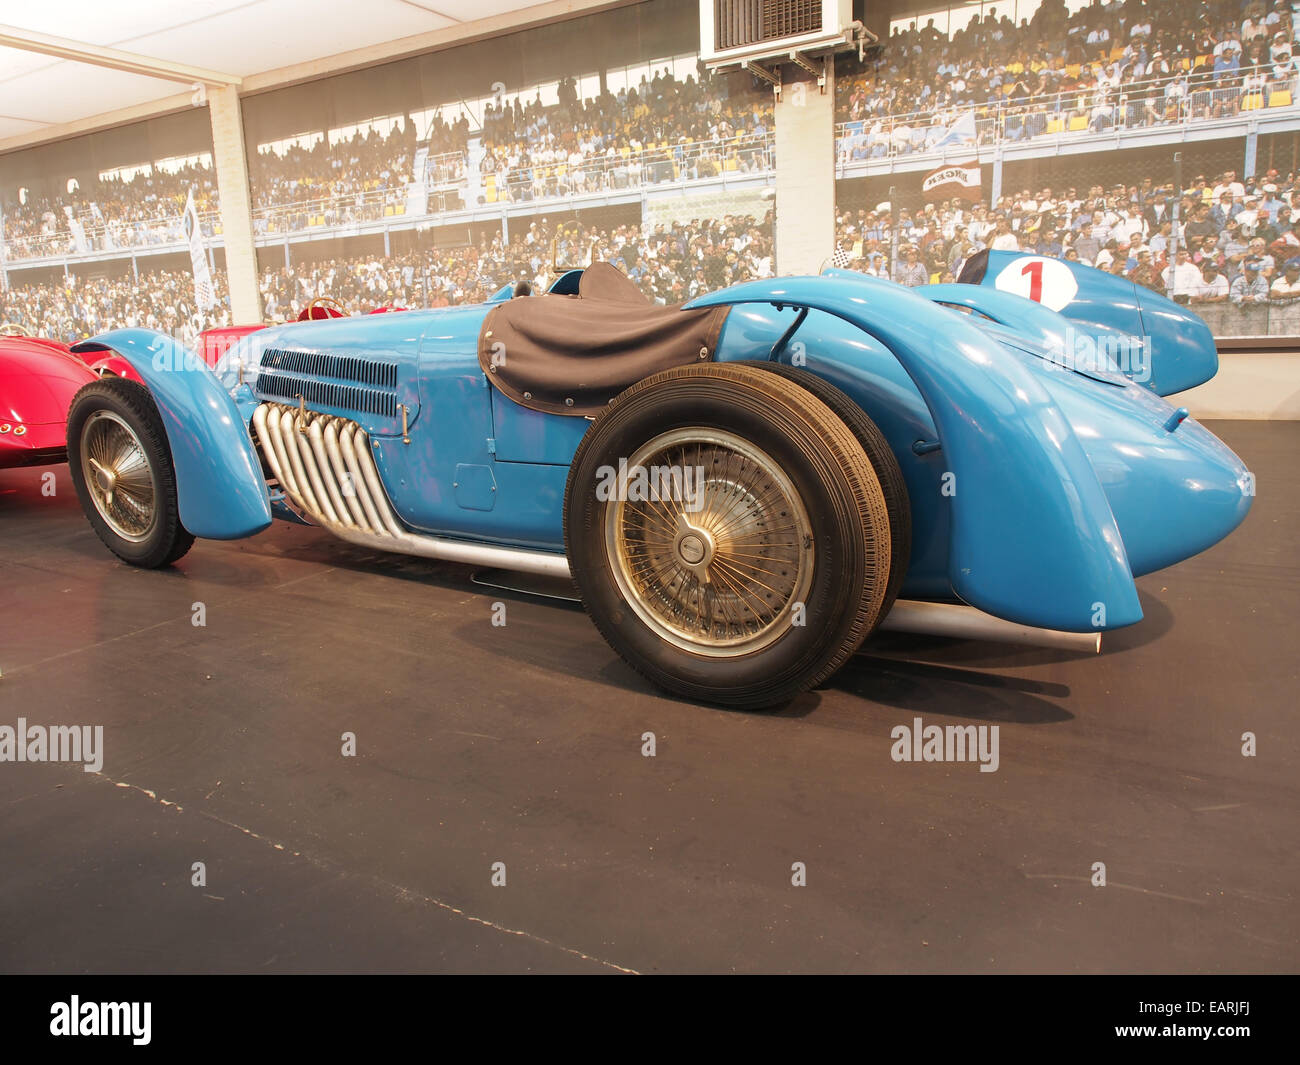 1938 Bugatti Type GP 59-50B, 8 cylindres, 4741cm3, 400hp, 300km/h, photo 5 Banque D'Images